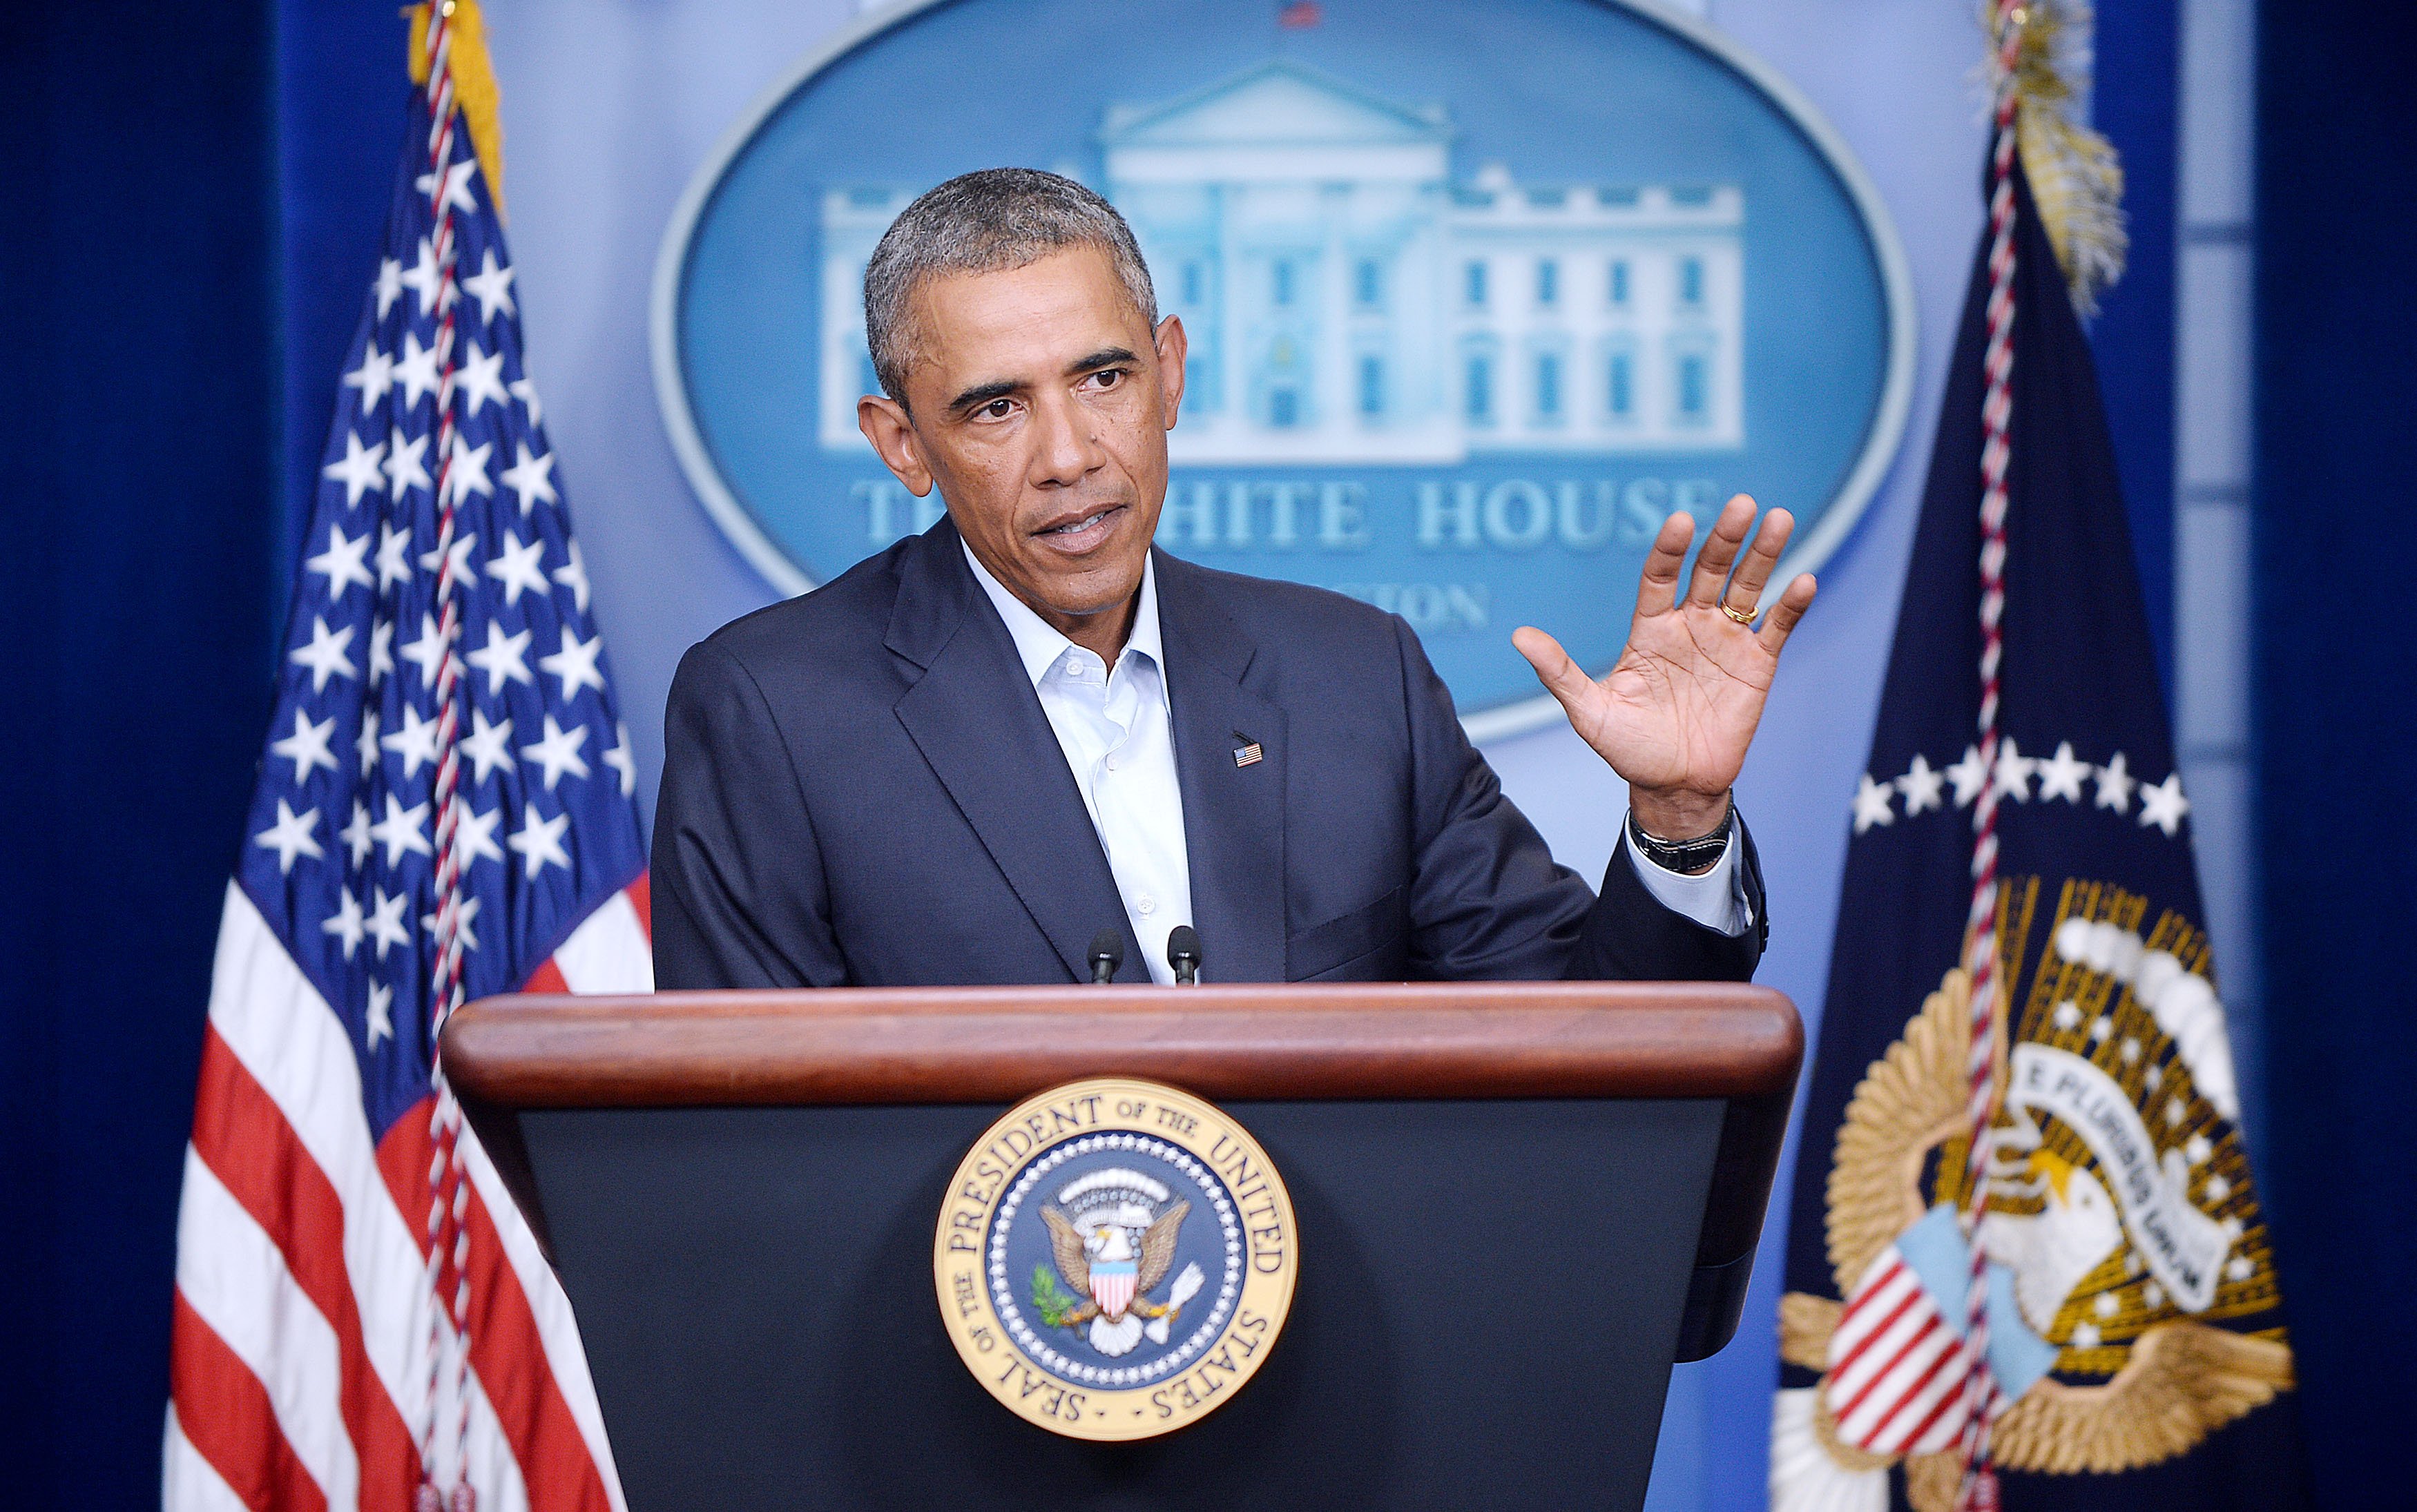 President Obama delivers a statement to provide an update on Iraq and the situation in Ferguson, Missouri - DC